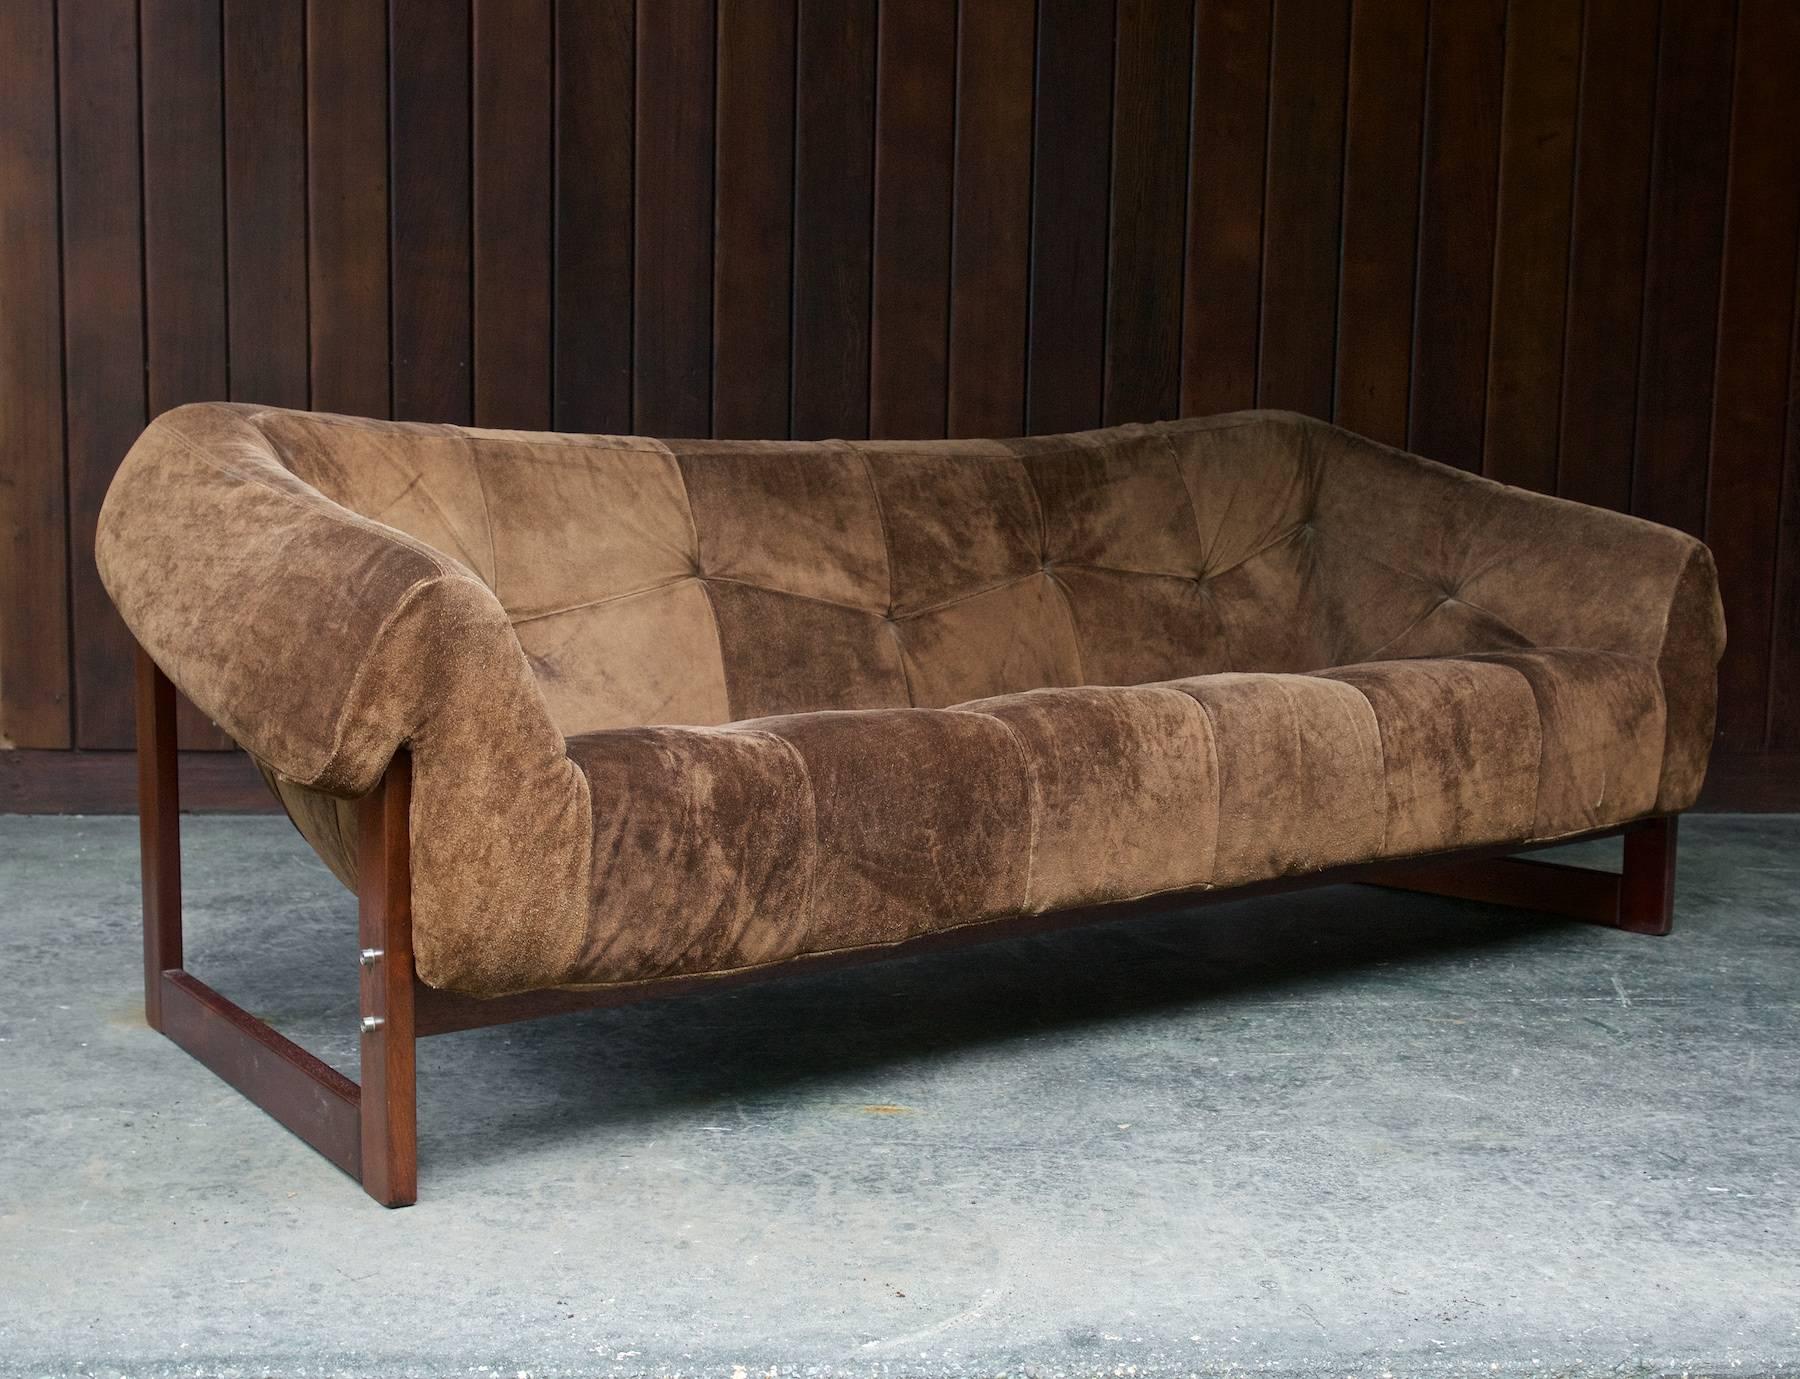 Rare three-seat sofa designed by Percival Lafer. Mfg. by Lafer S.A. in Brazil. Showing some wear to original upholstery. 

Measures: W 75 x D 32 x seat H 15 / Arm H 22 / Back H27 in.